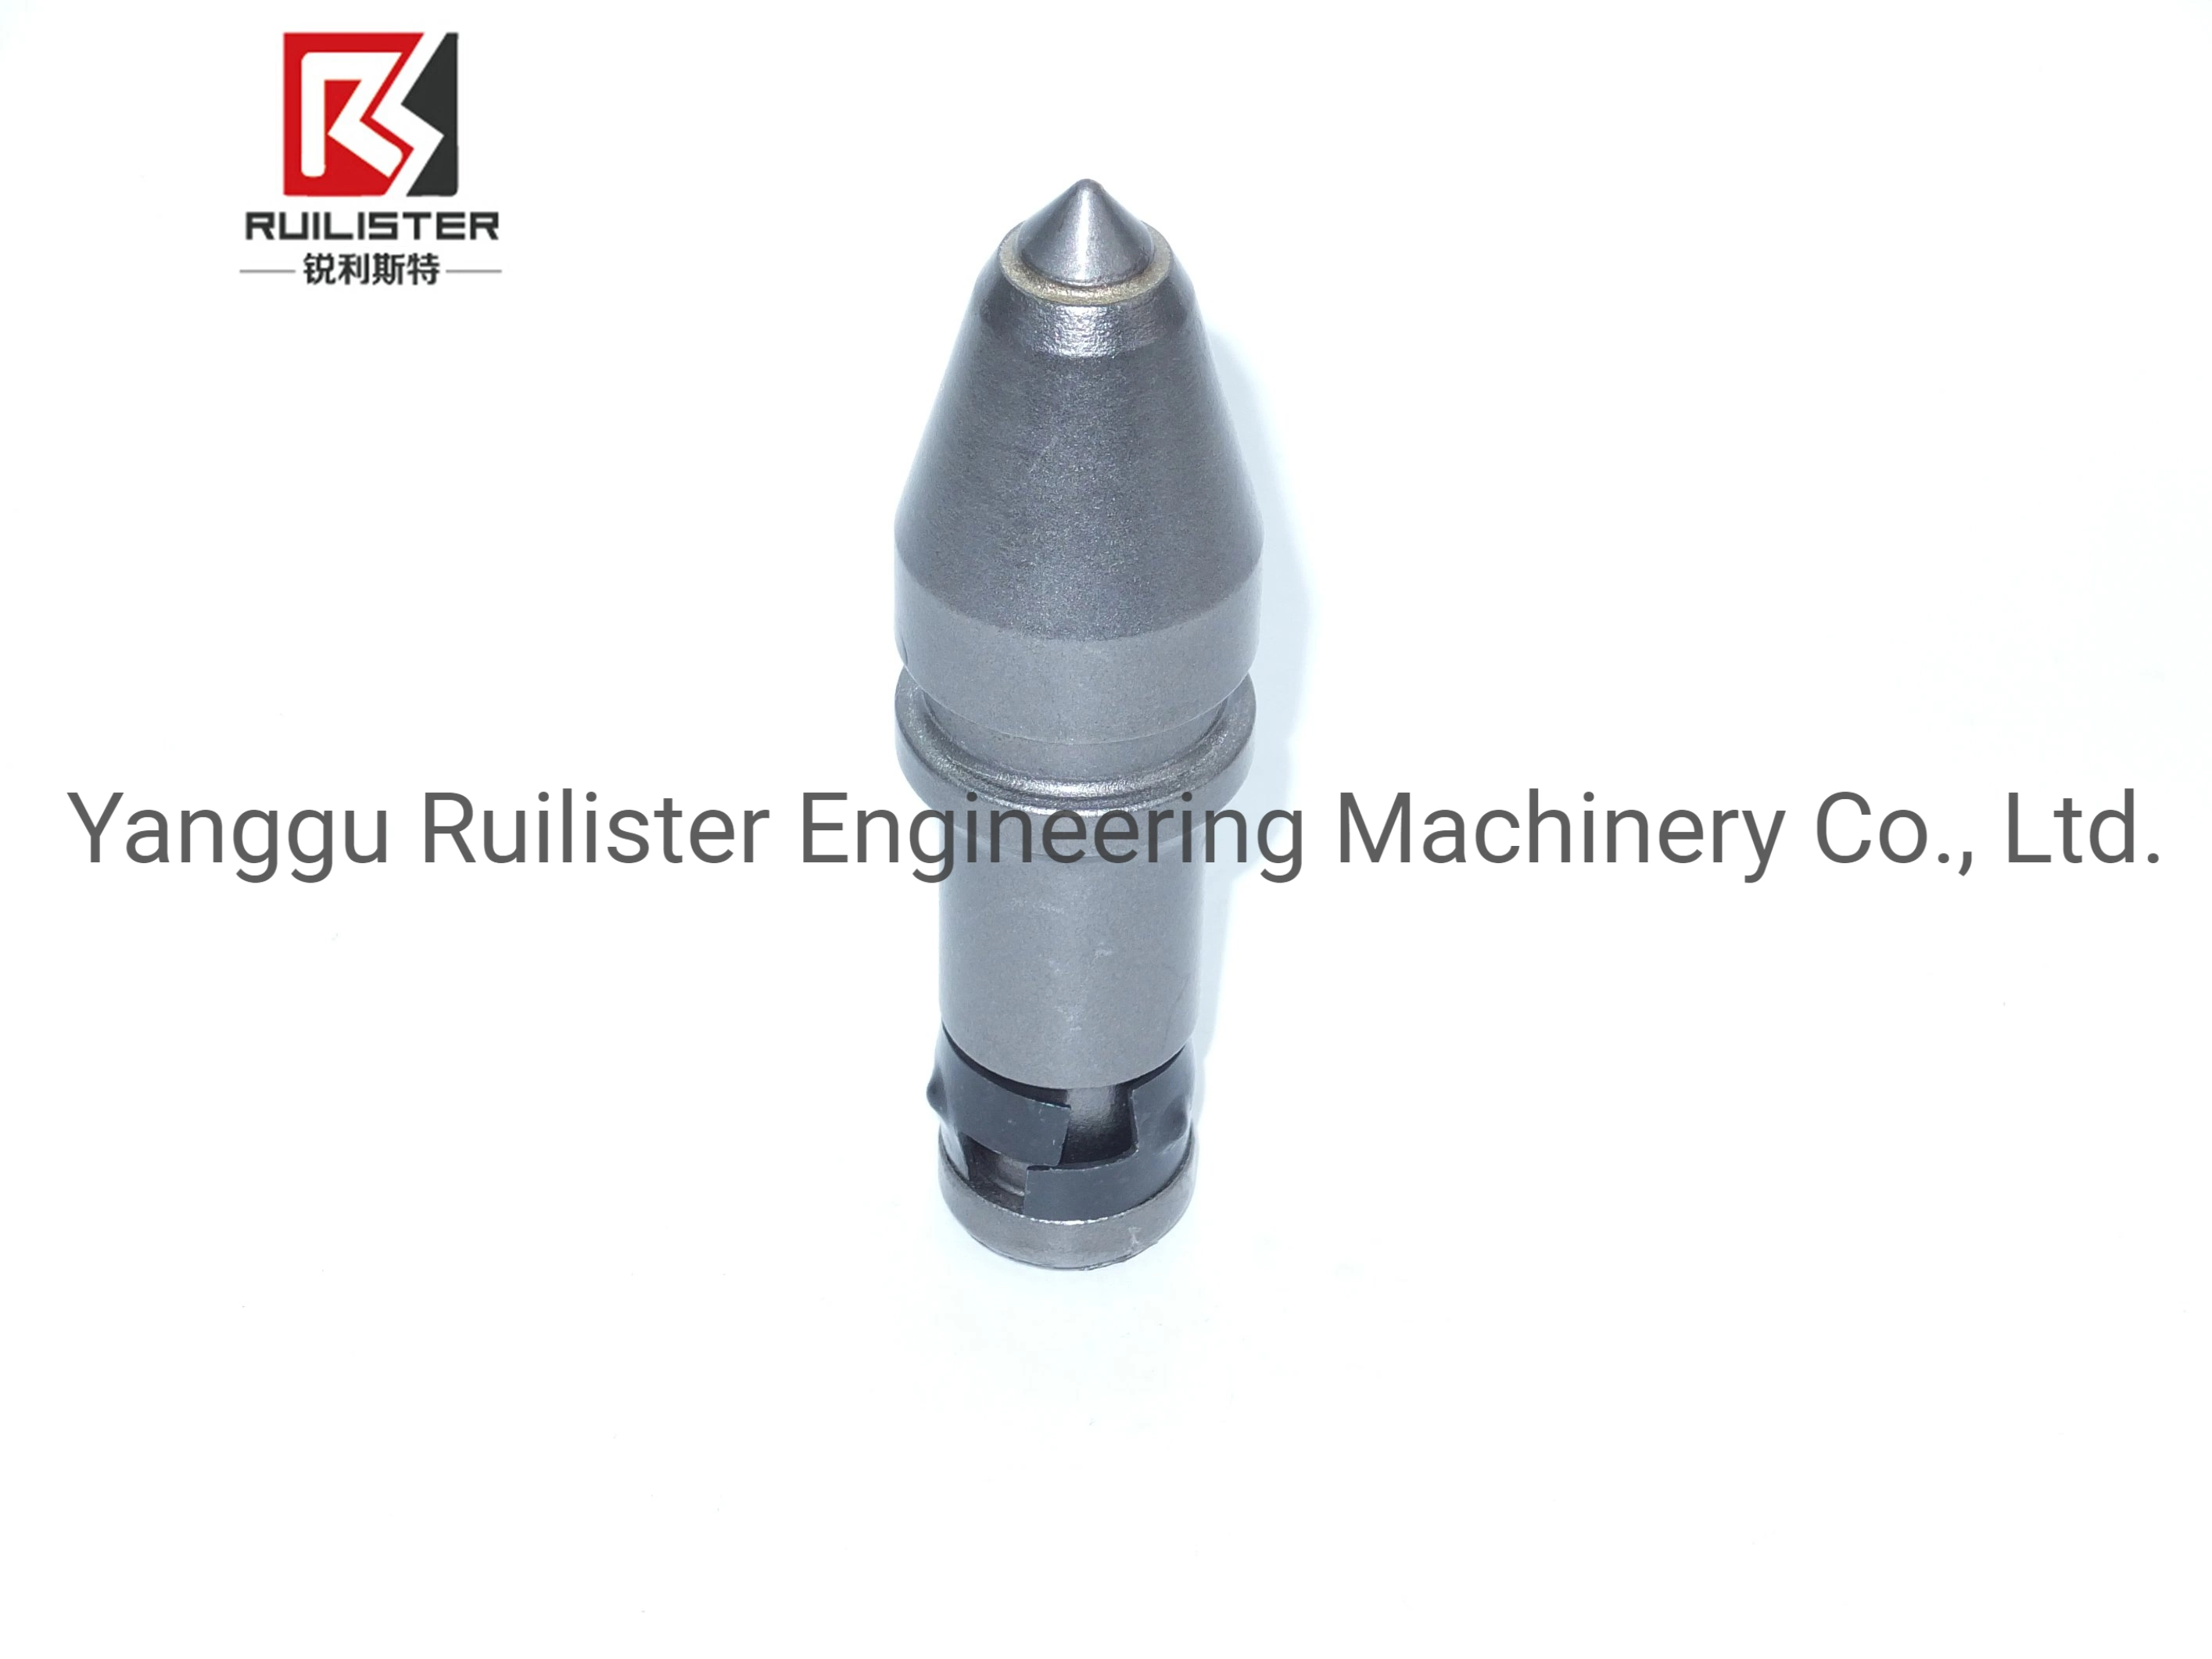 Drill Tools of C31HD Rock Drilling Bit and Teeth Made by Ruilister